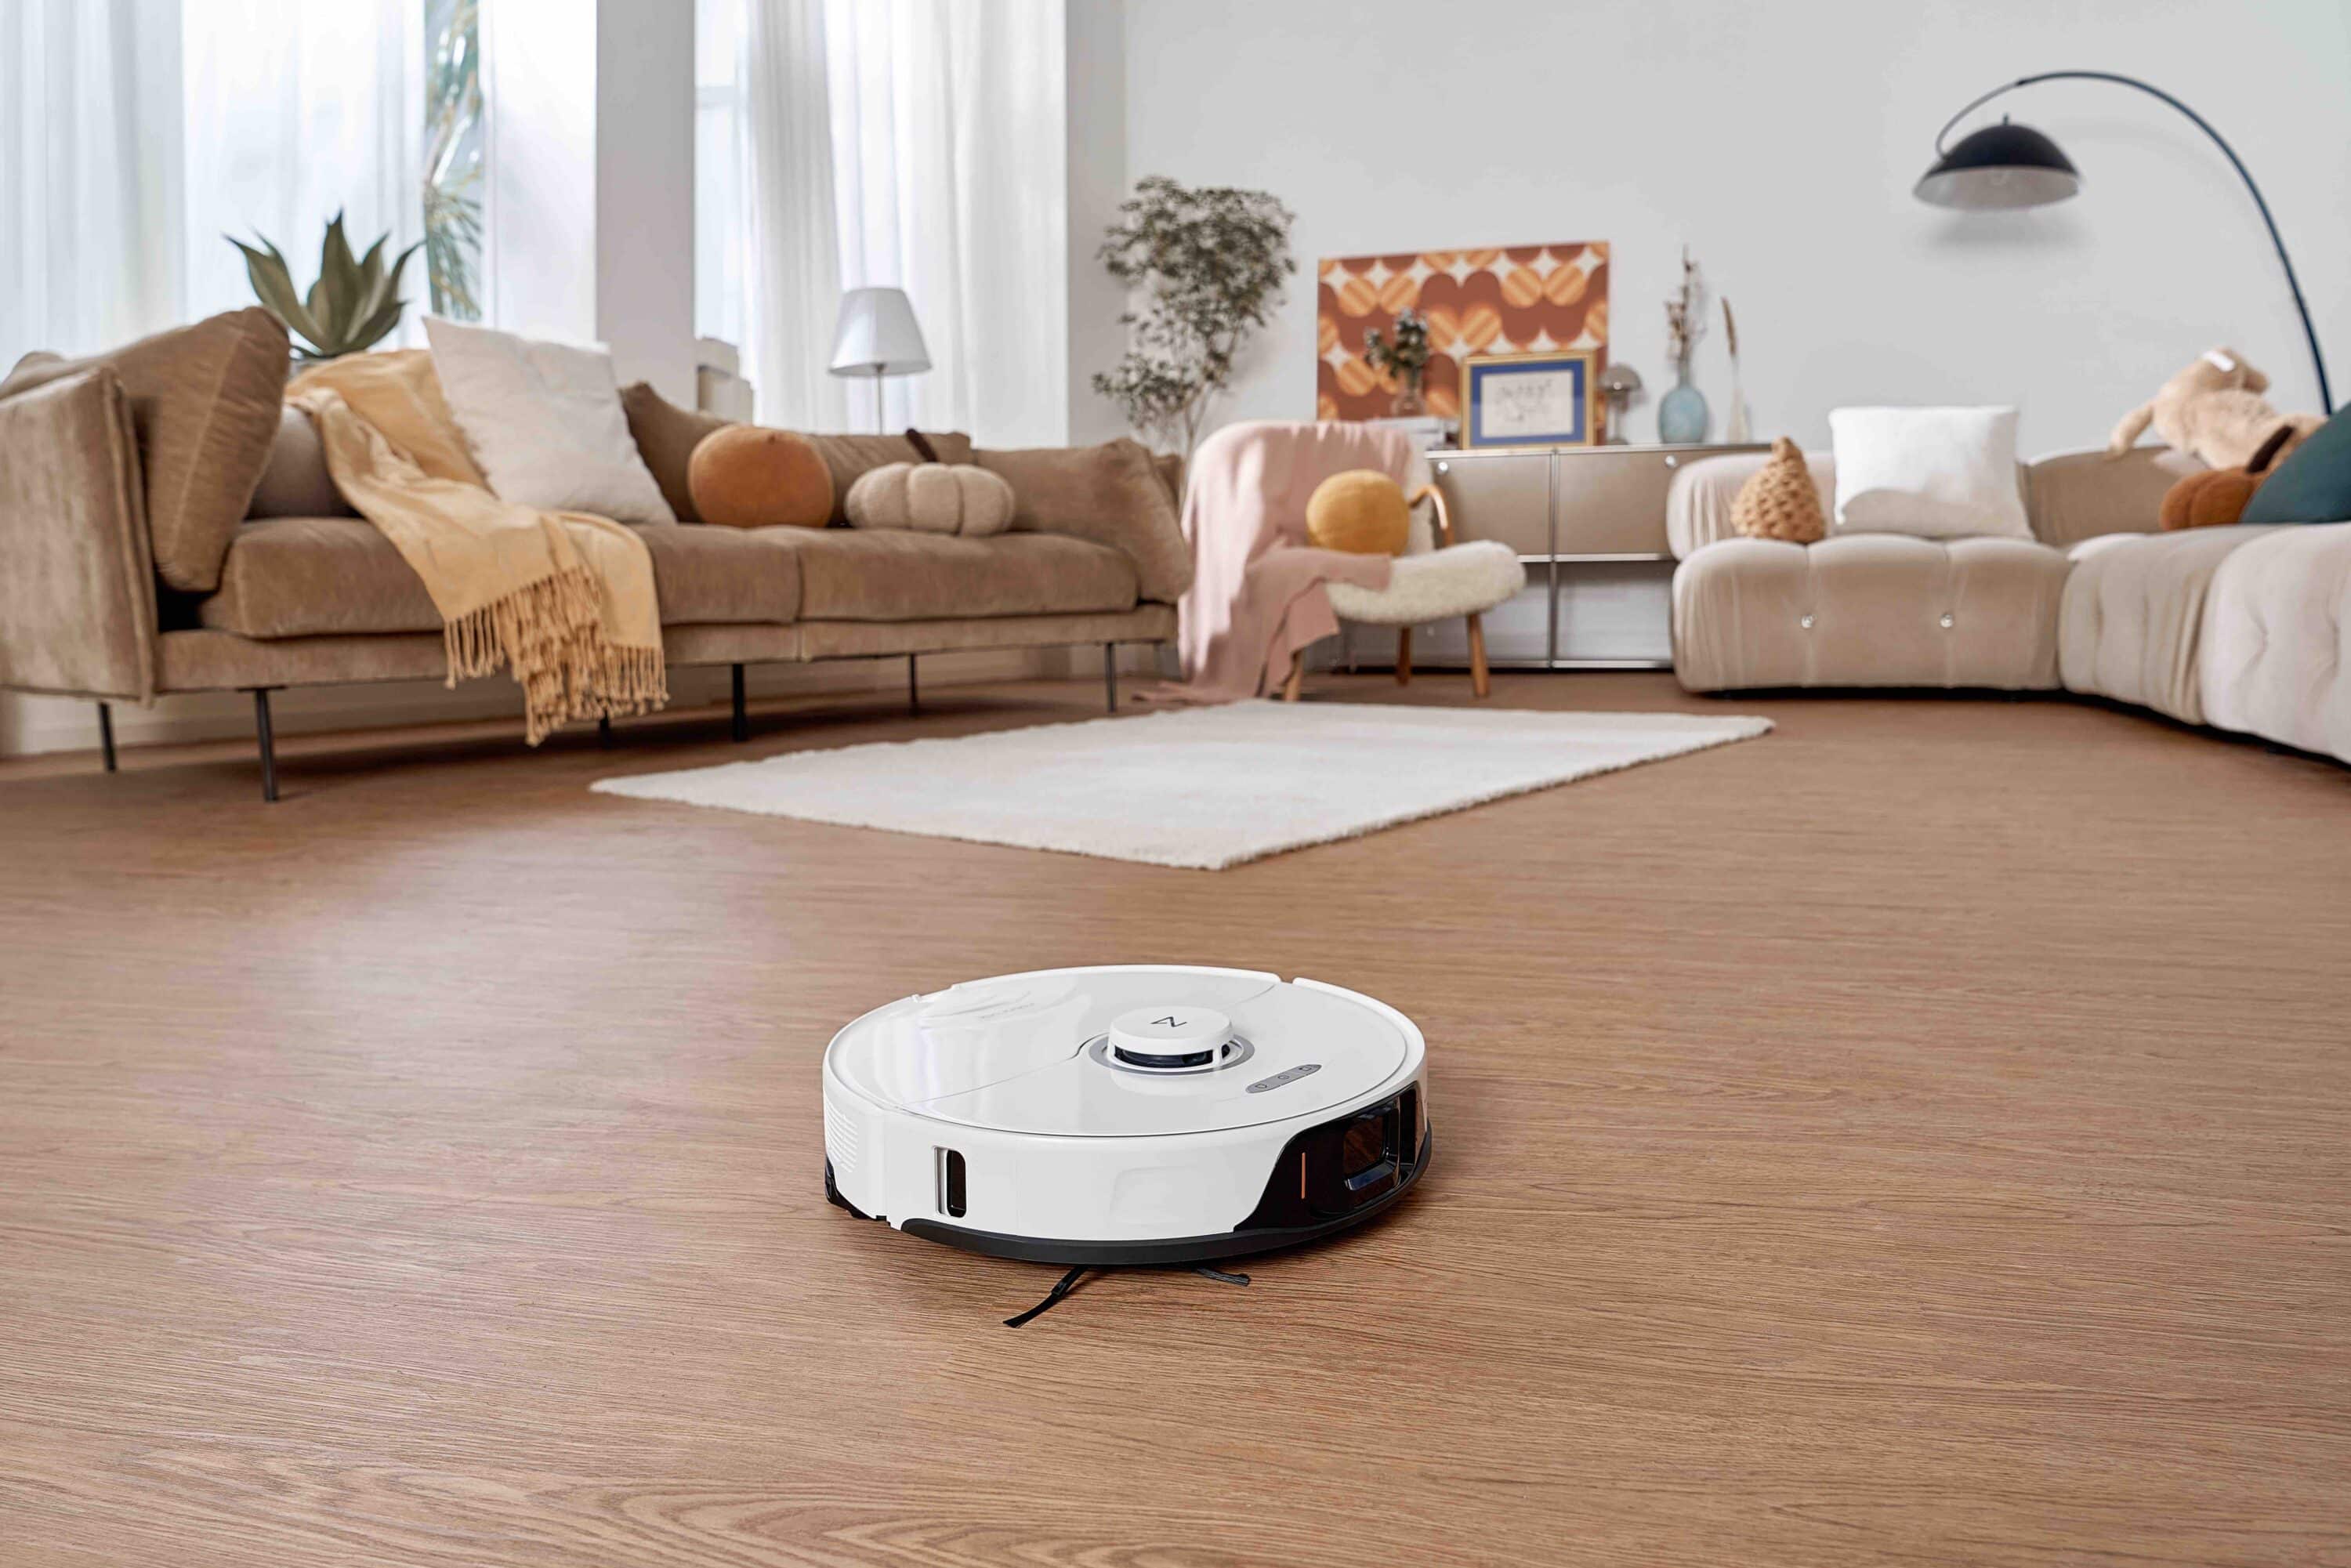 Roborock reveals its new S8 Pro Ultra robot vacuum and cleaning station -  Tech Guide